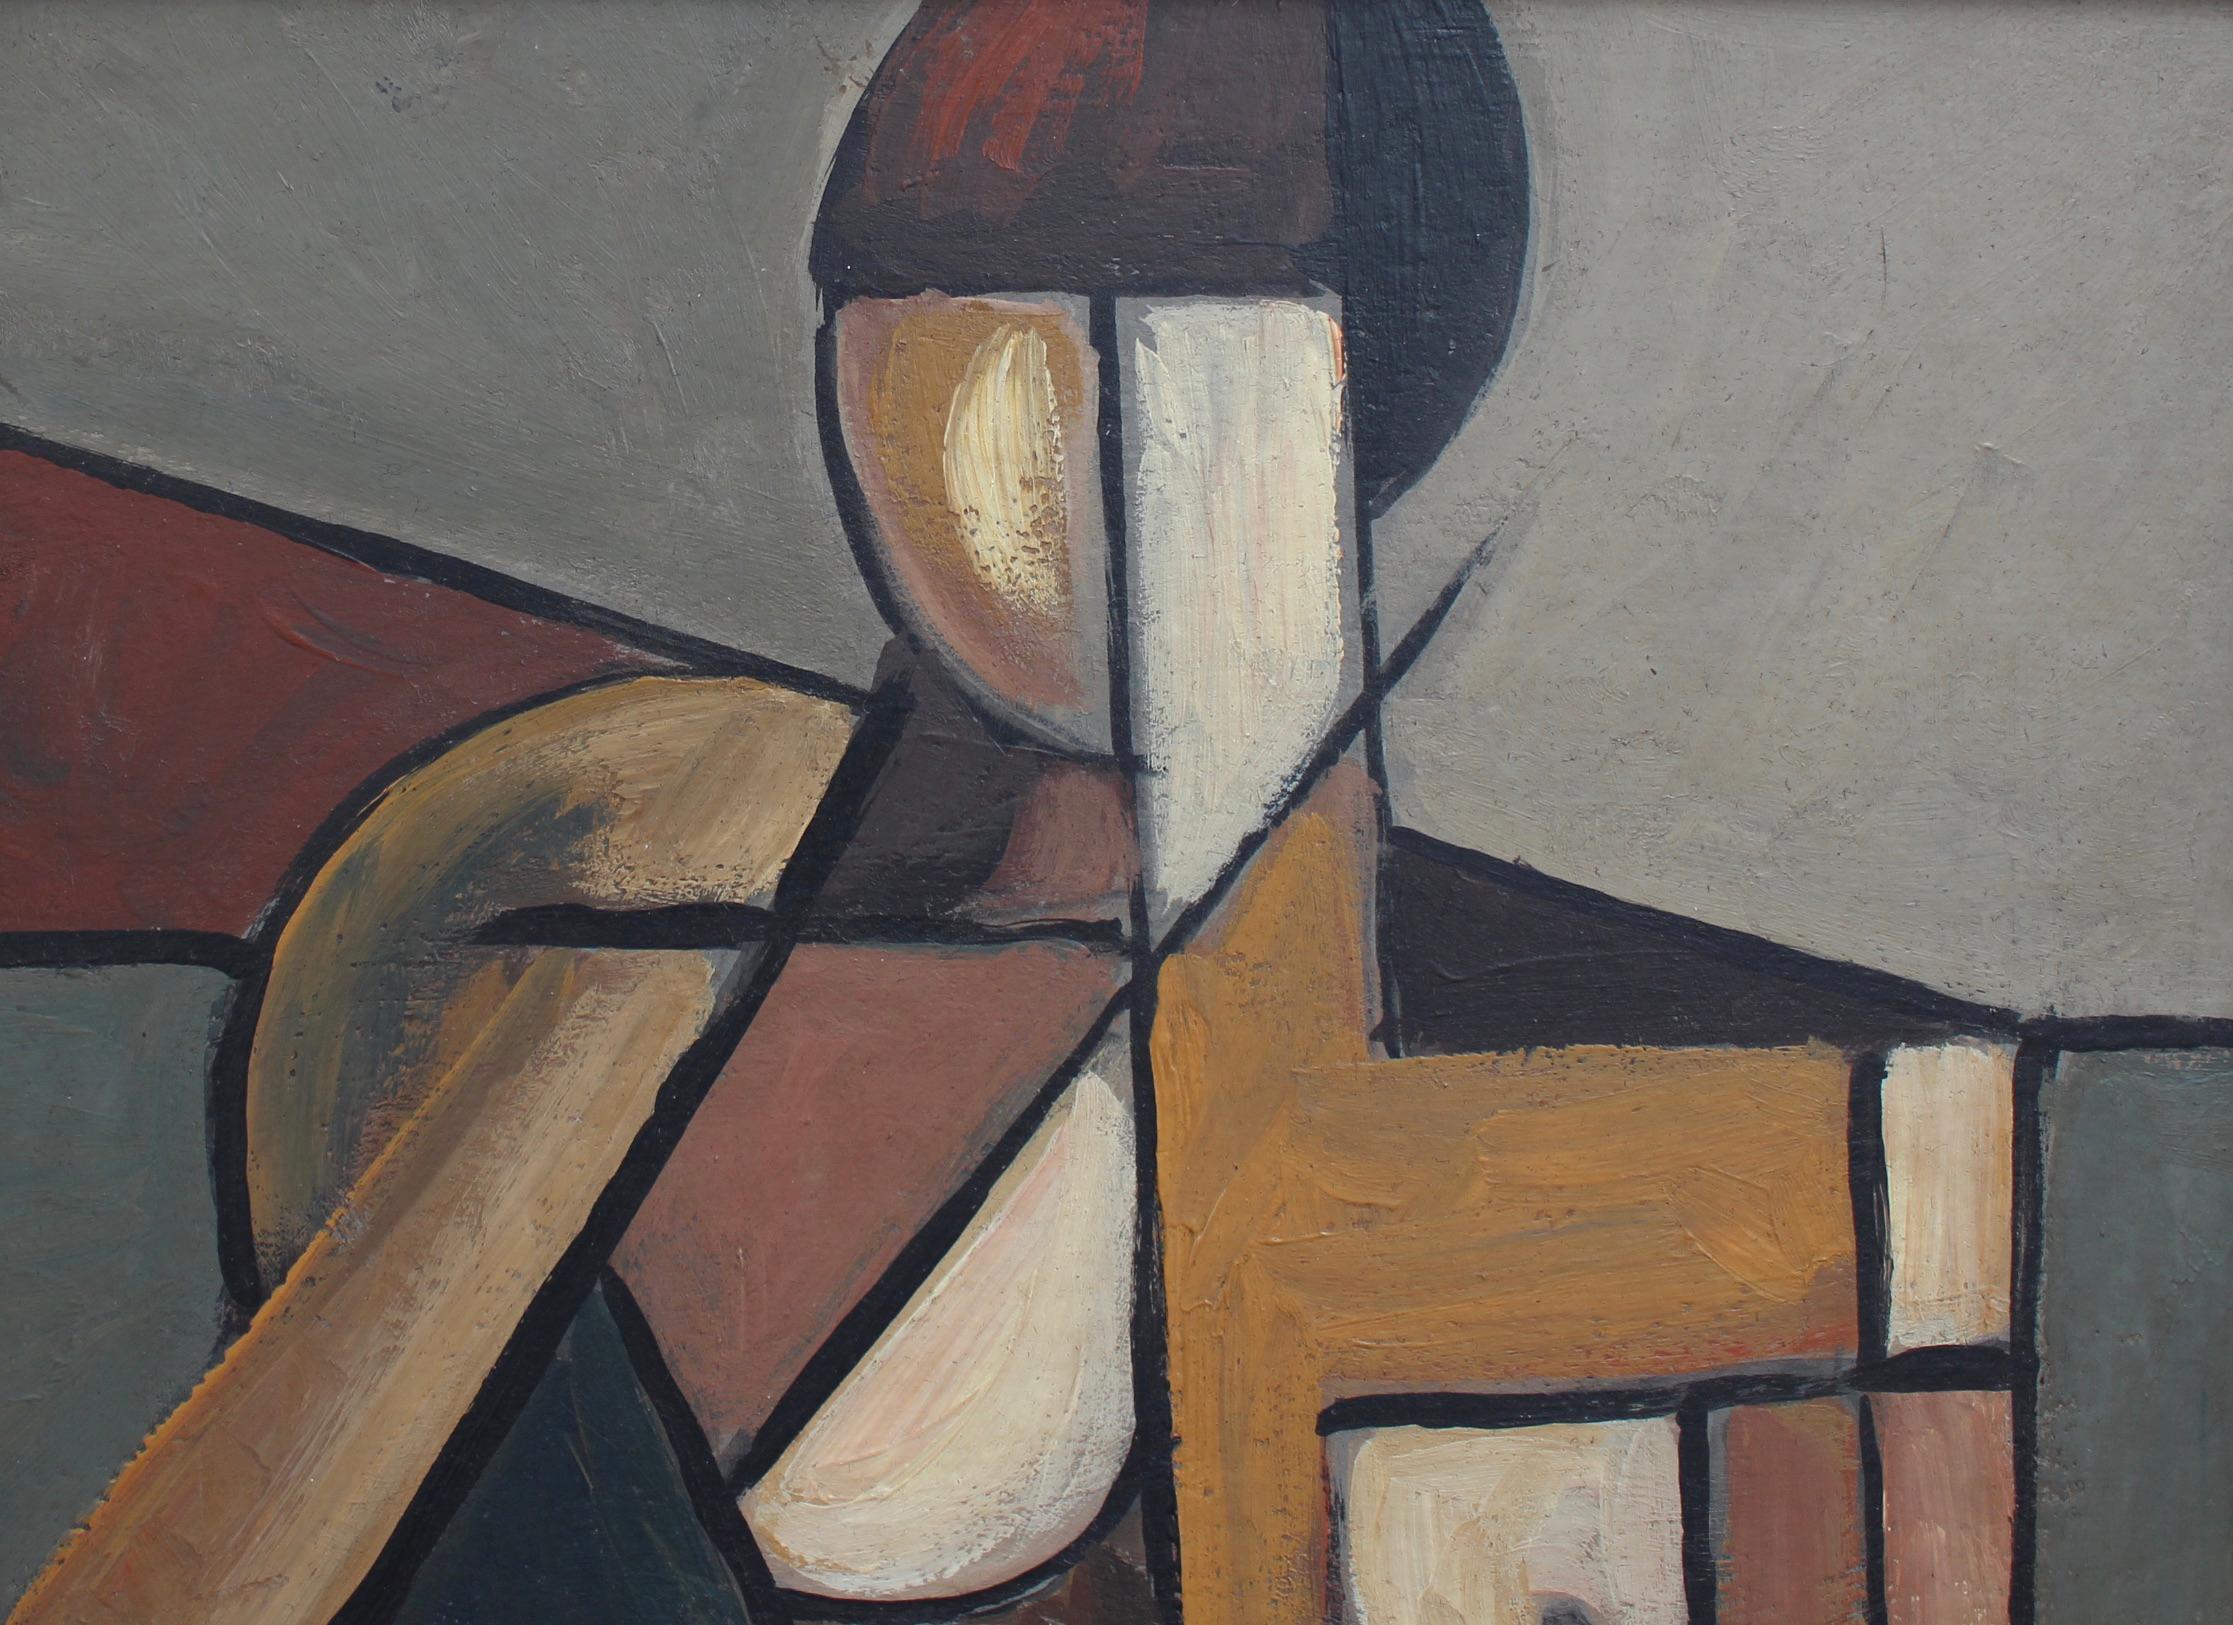 'Portrait of Seated Nude', oil on board, Berlin School by artist with initials A.M. (circa 1960s). A splendid cubist depiction, this is a significant portrait of a seated nude woman in geometric perspective. The earth-tone hues - brown, beige, clay,